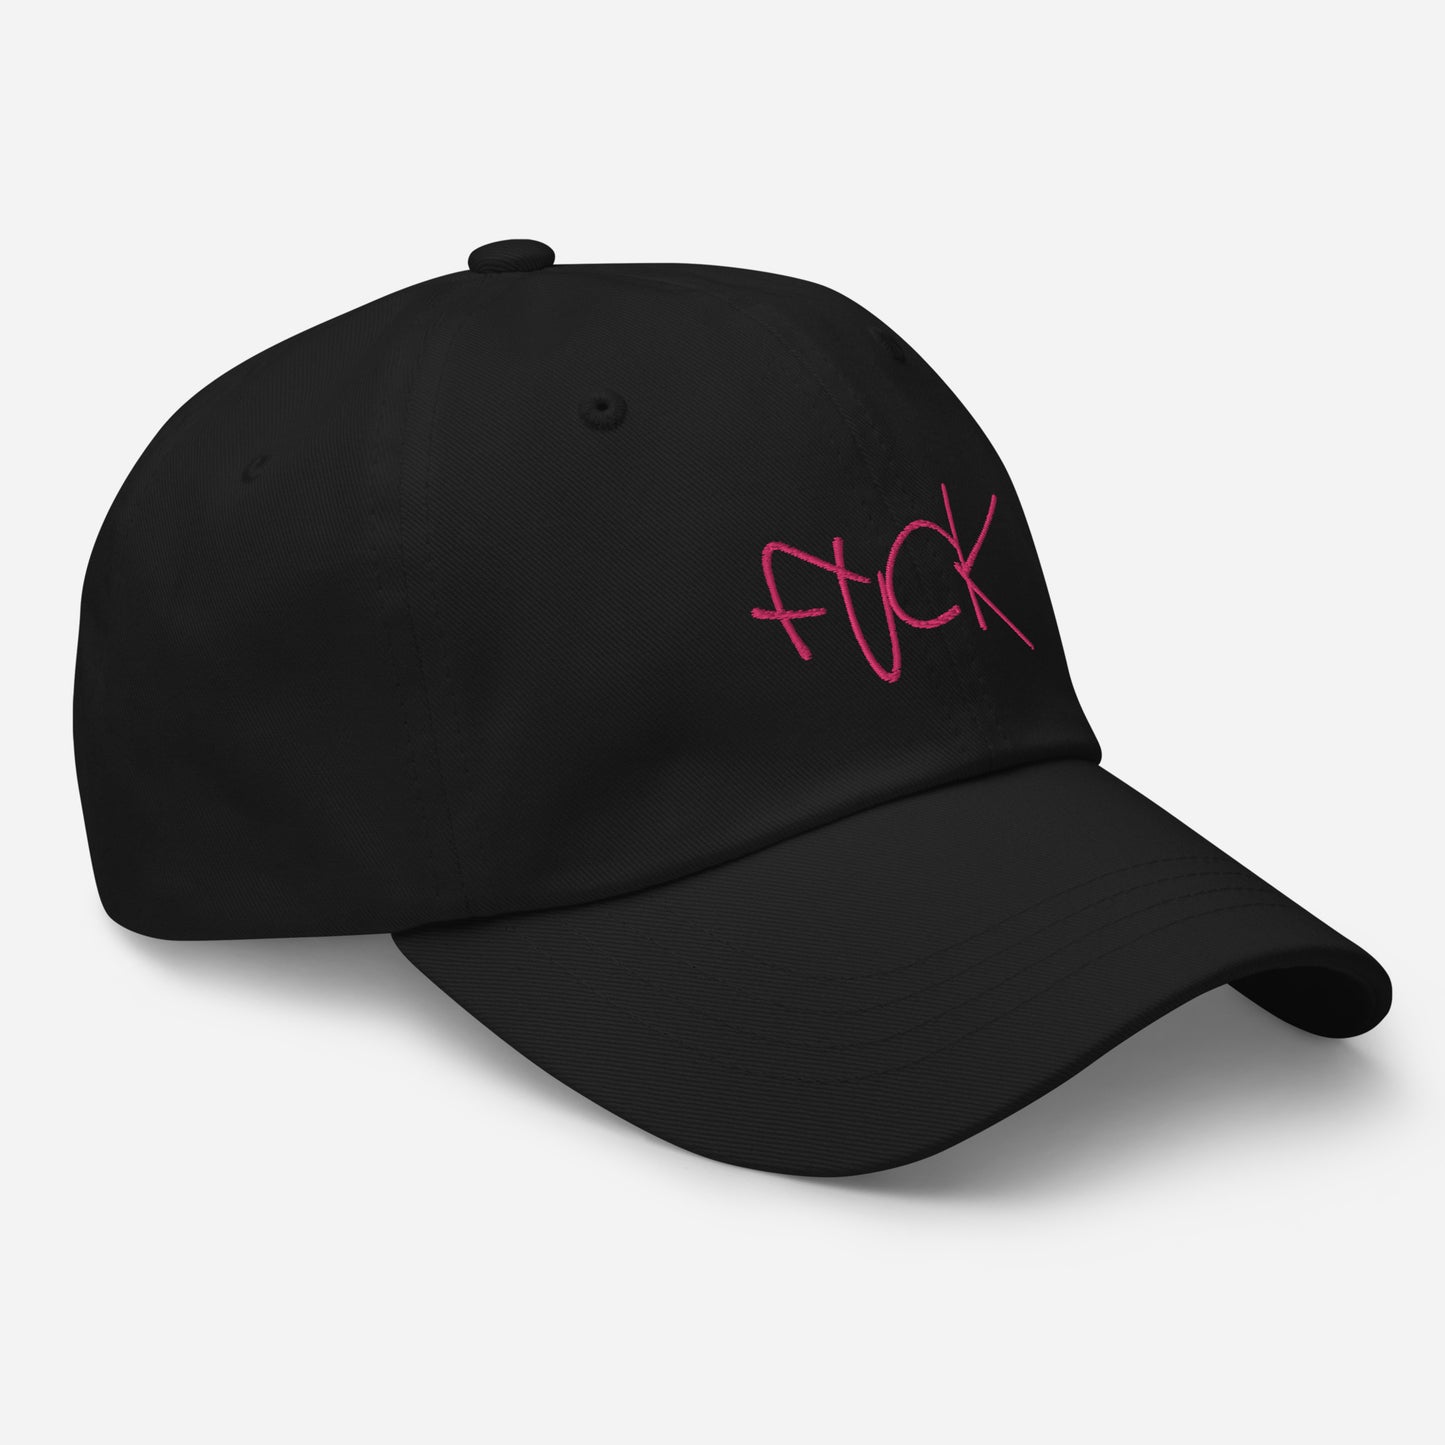 "FVCK" Hat